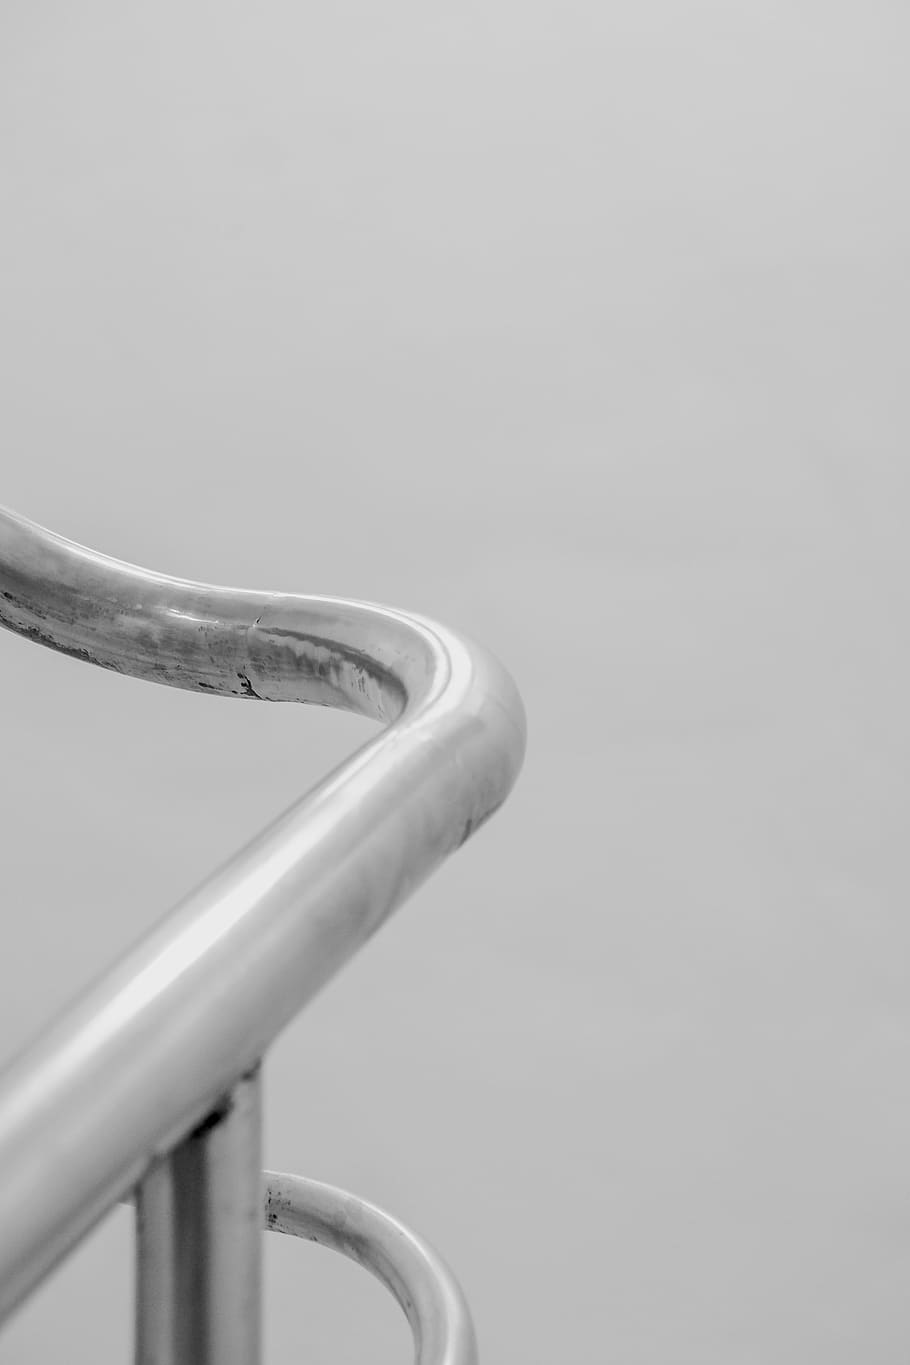 close up photo of stainless steel curved railings, banister, handrail, HD wallpaper